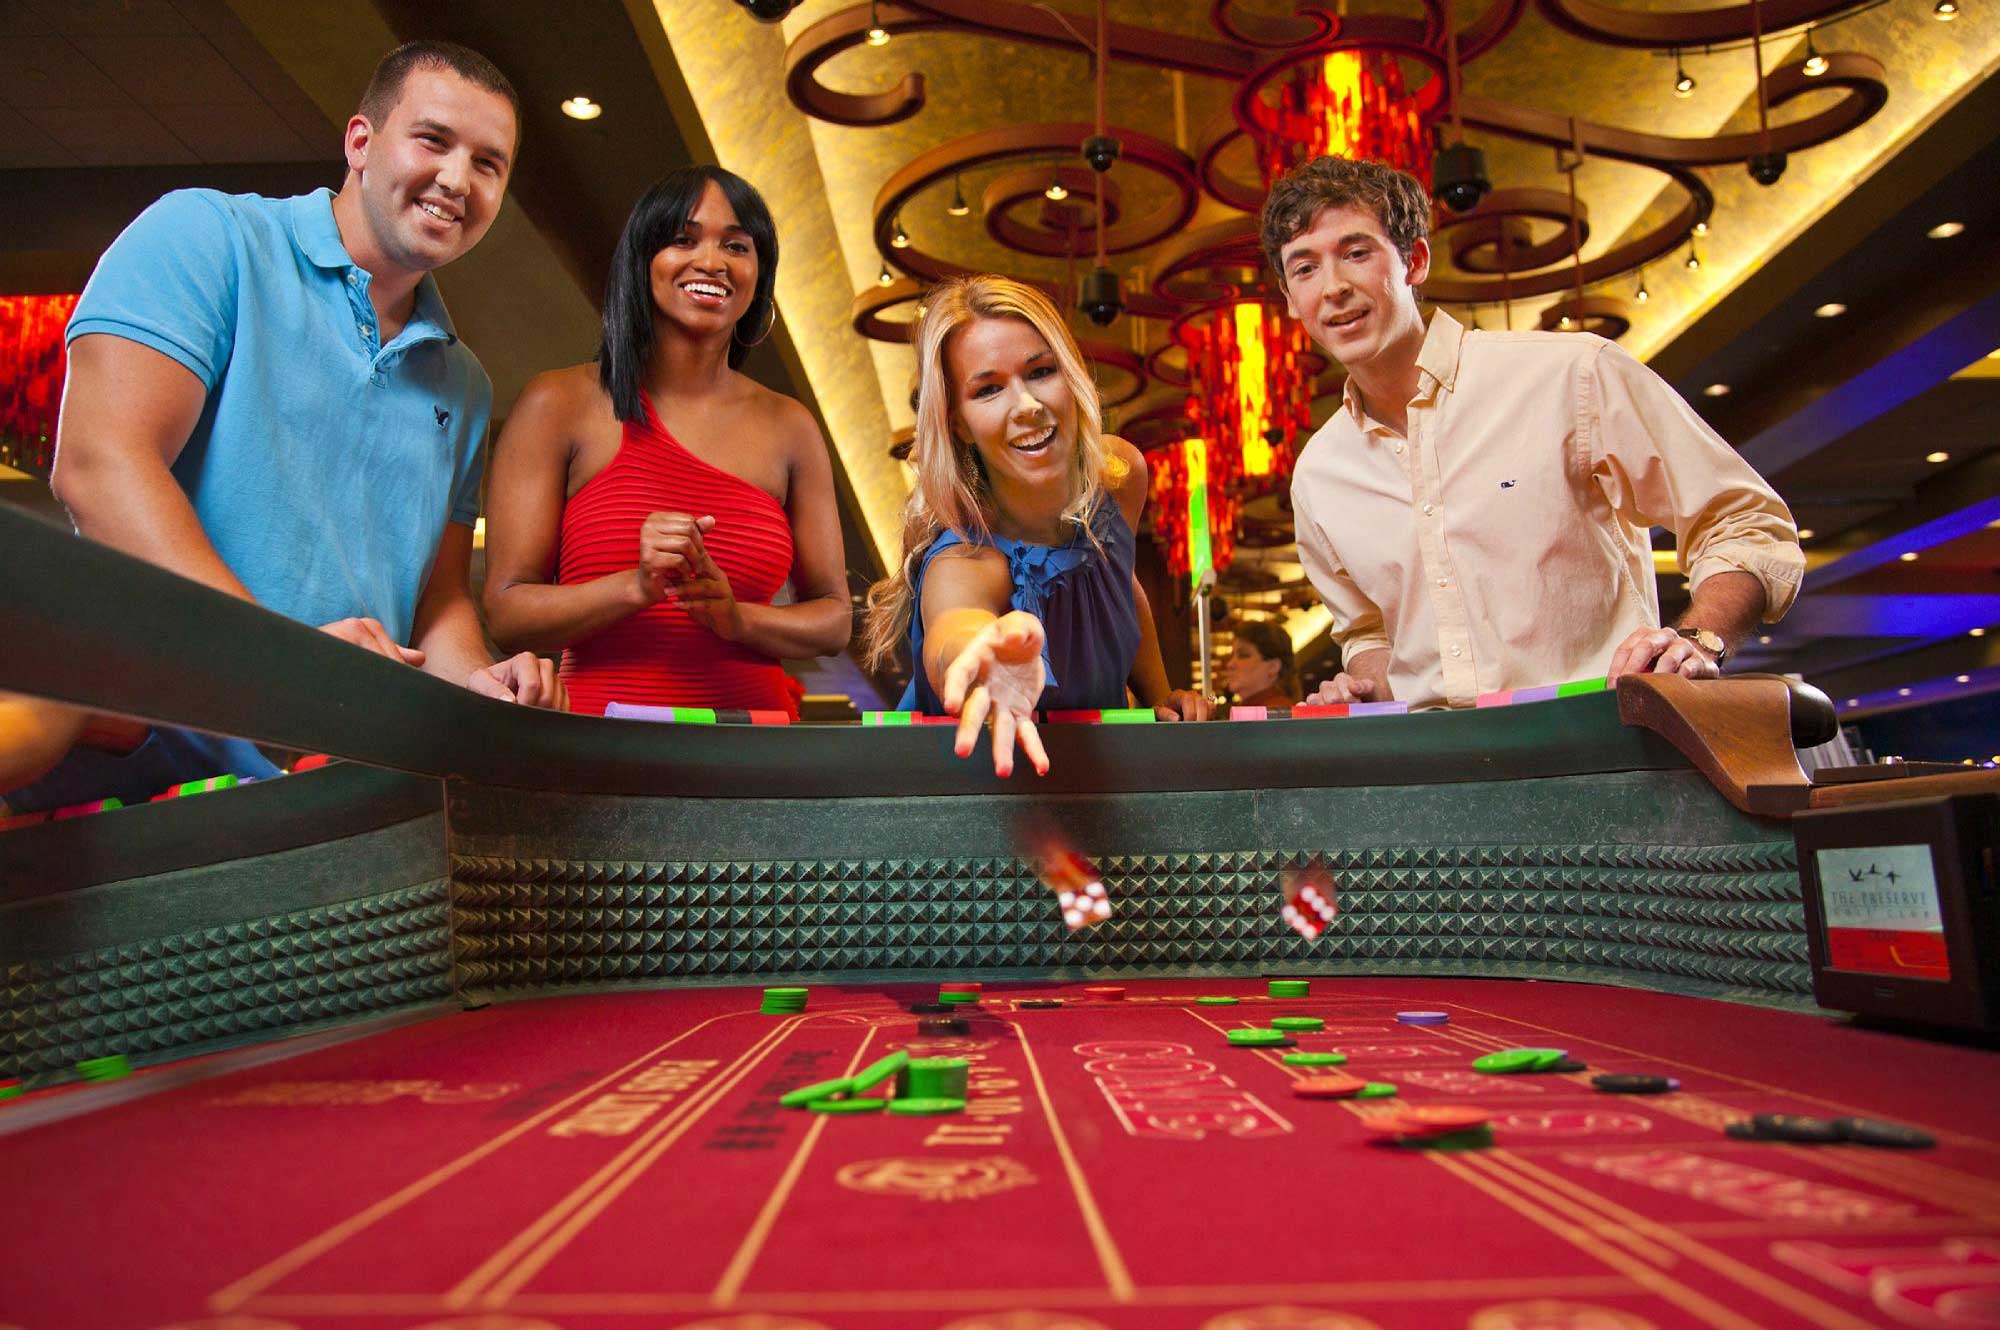 How To Play Craps: Everything You Need To Know To Play With Confidence